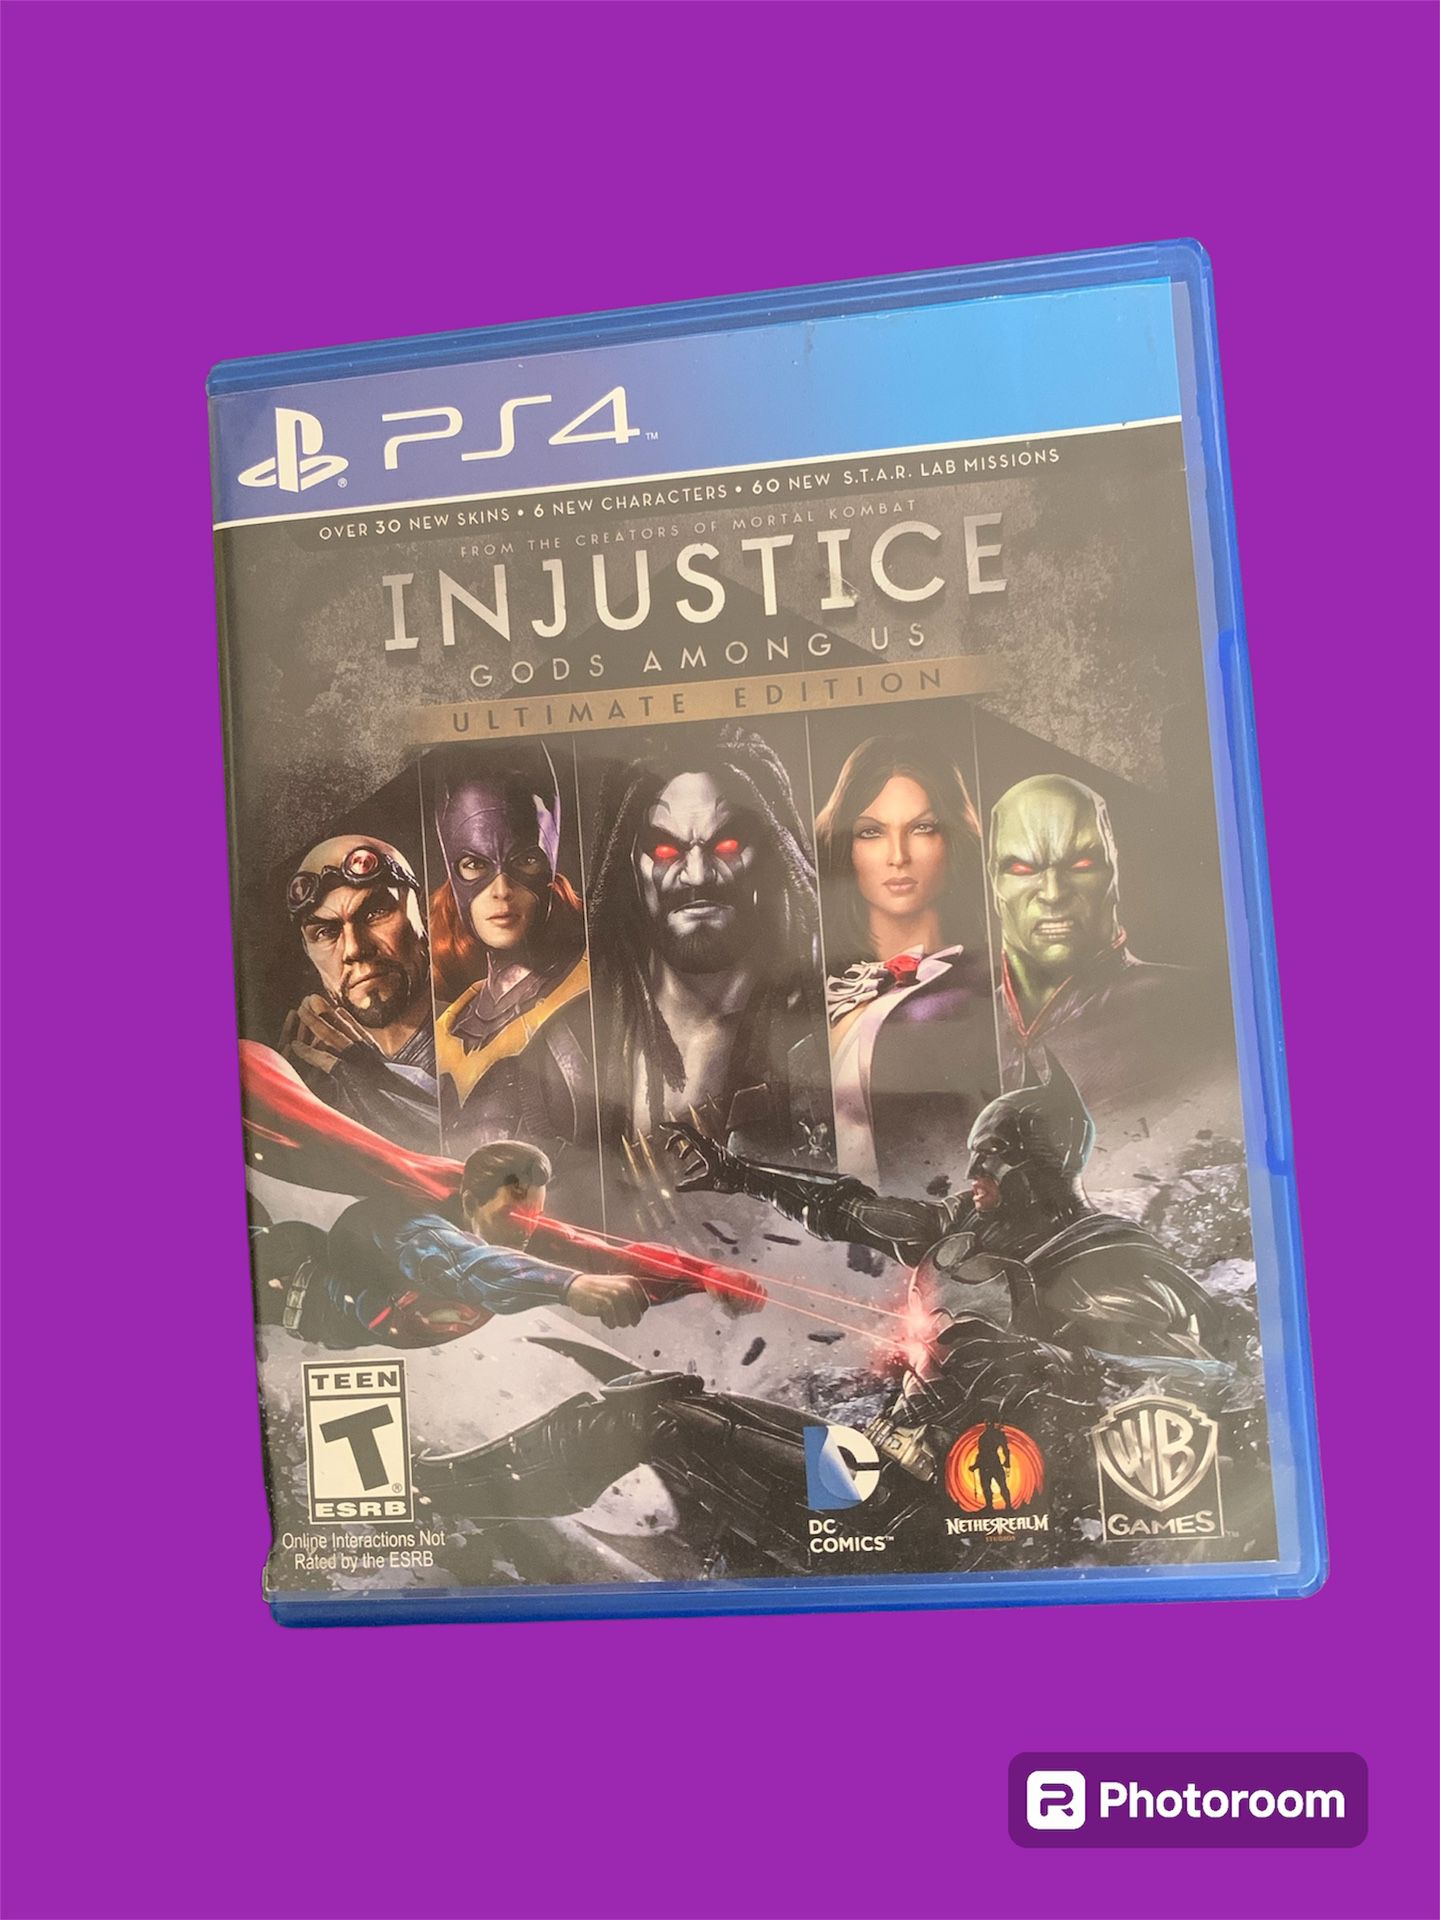 PS4 Game Injustice Gods Amino Us Ultimate  Edition $12